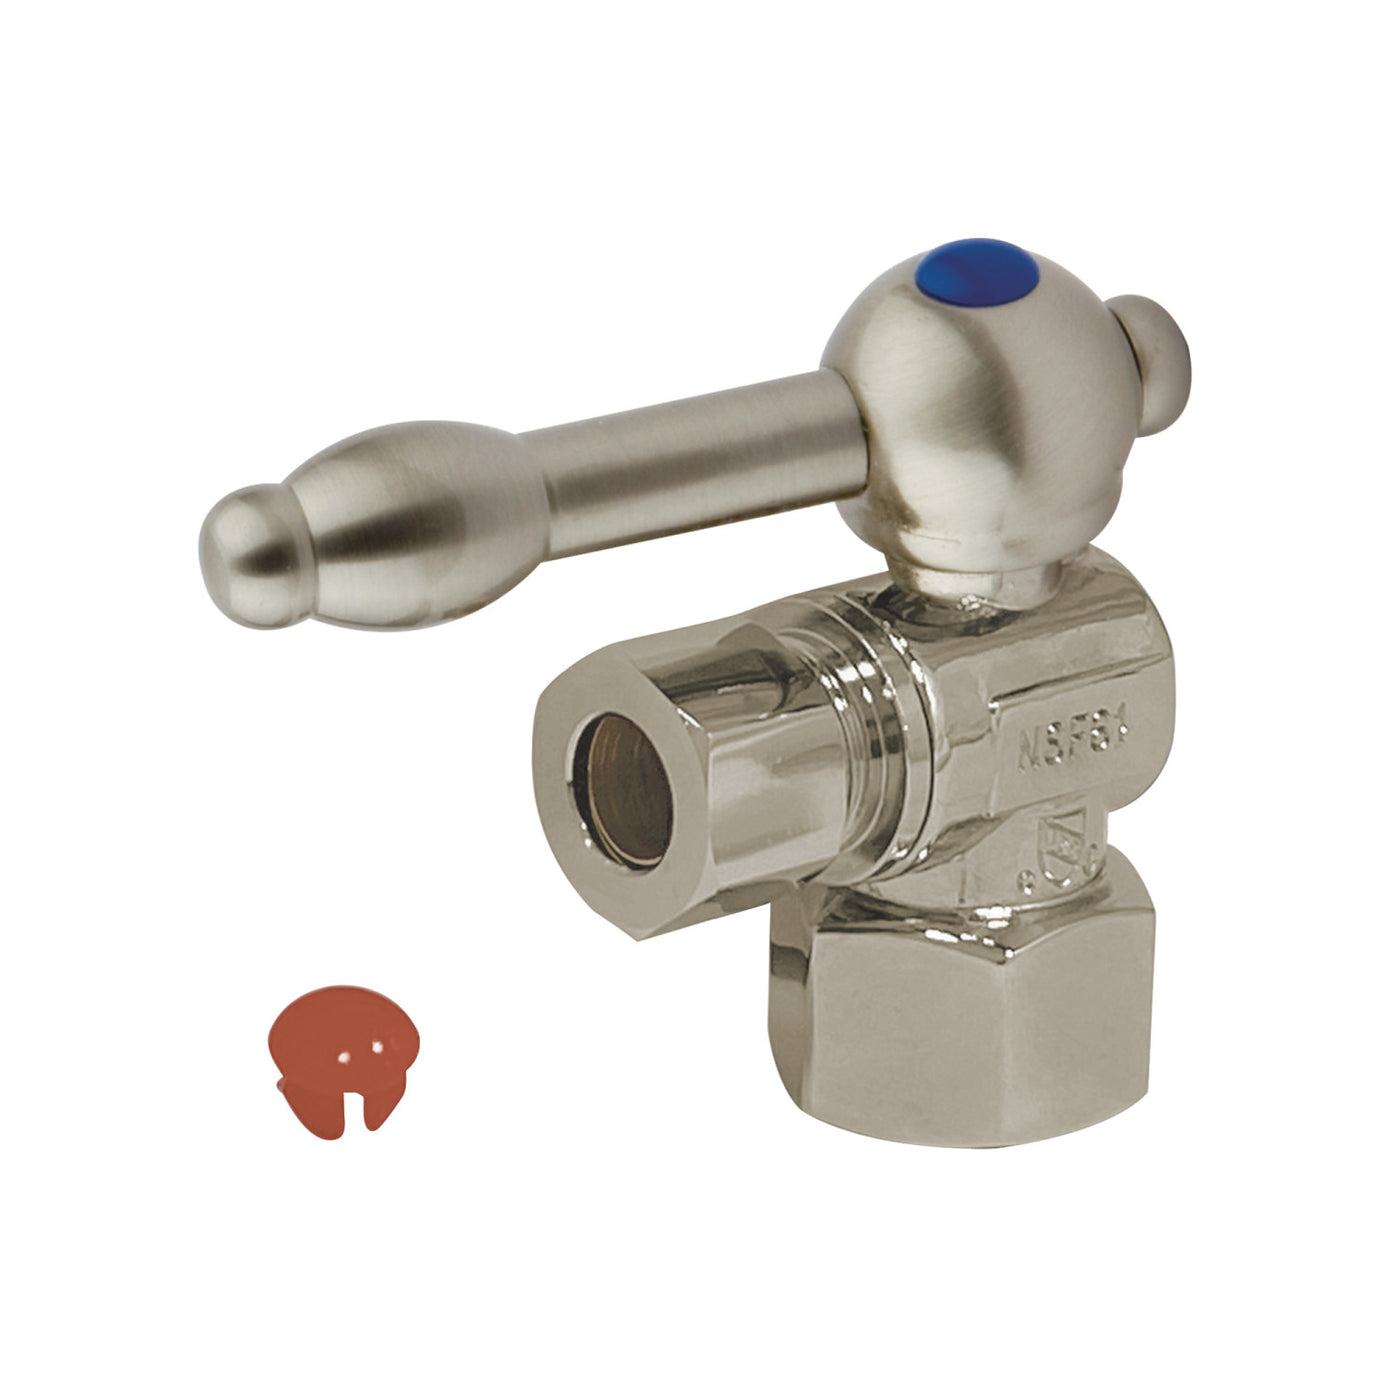 Elements of Design ECC43108KL 1/2-Inch FIP x 3/8-Inch OD Comp Angle Stop Valve, Brushed Nickel